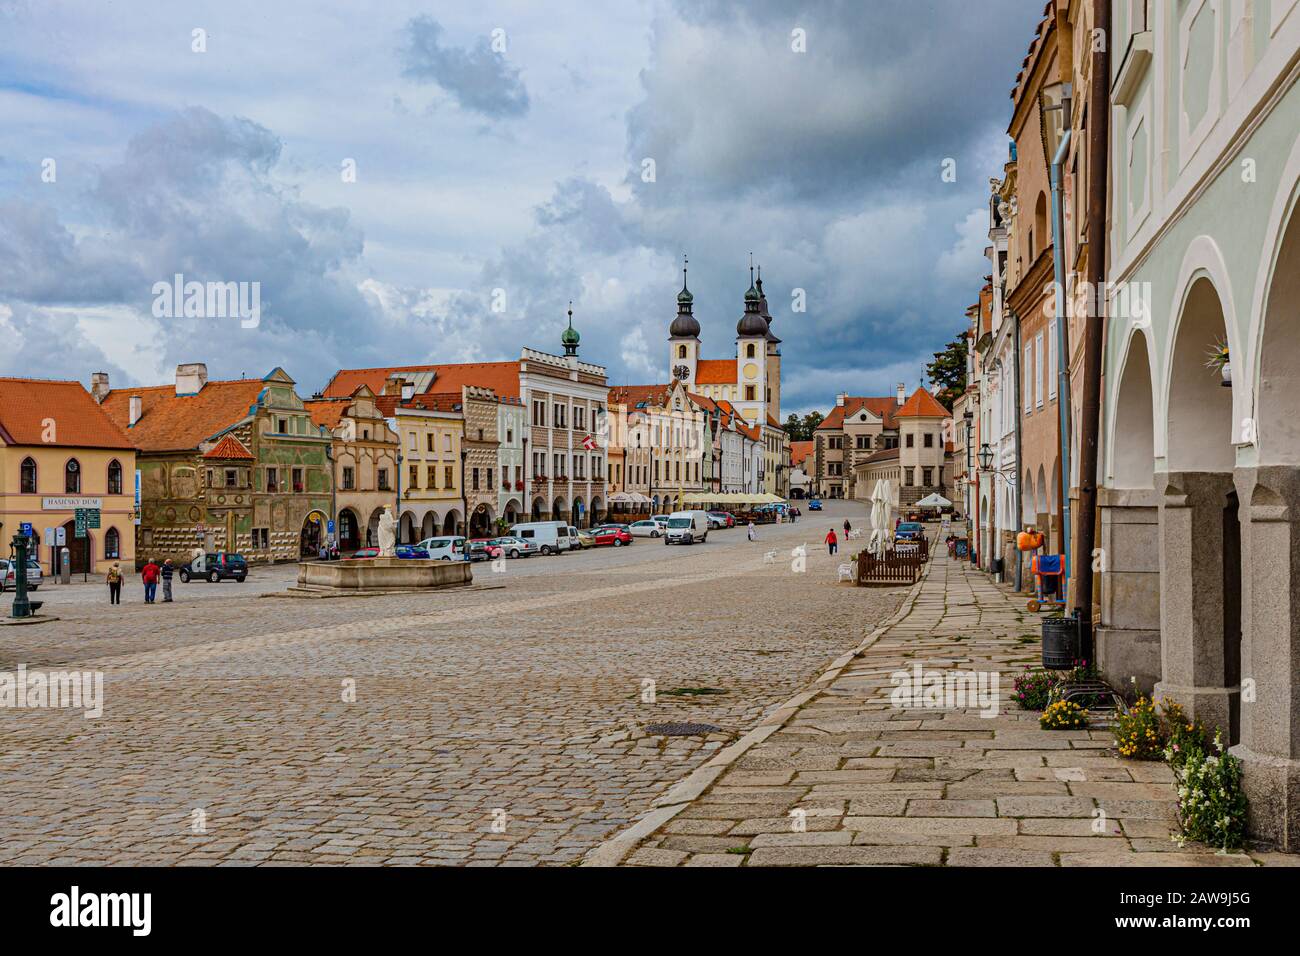 Telc / Czech Republic - September 27 2019: View of the historical city centre, UNESCO world heritage place, with arcades houses and cobblestone street. Stock Photo